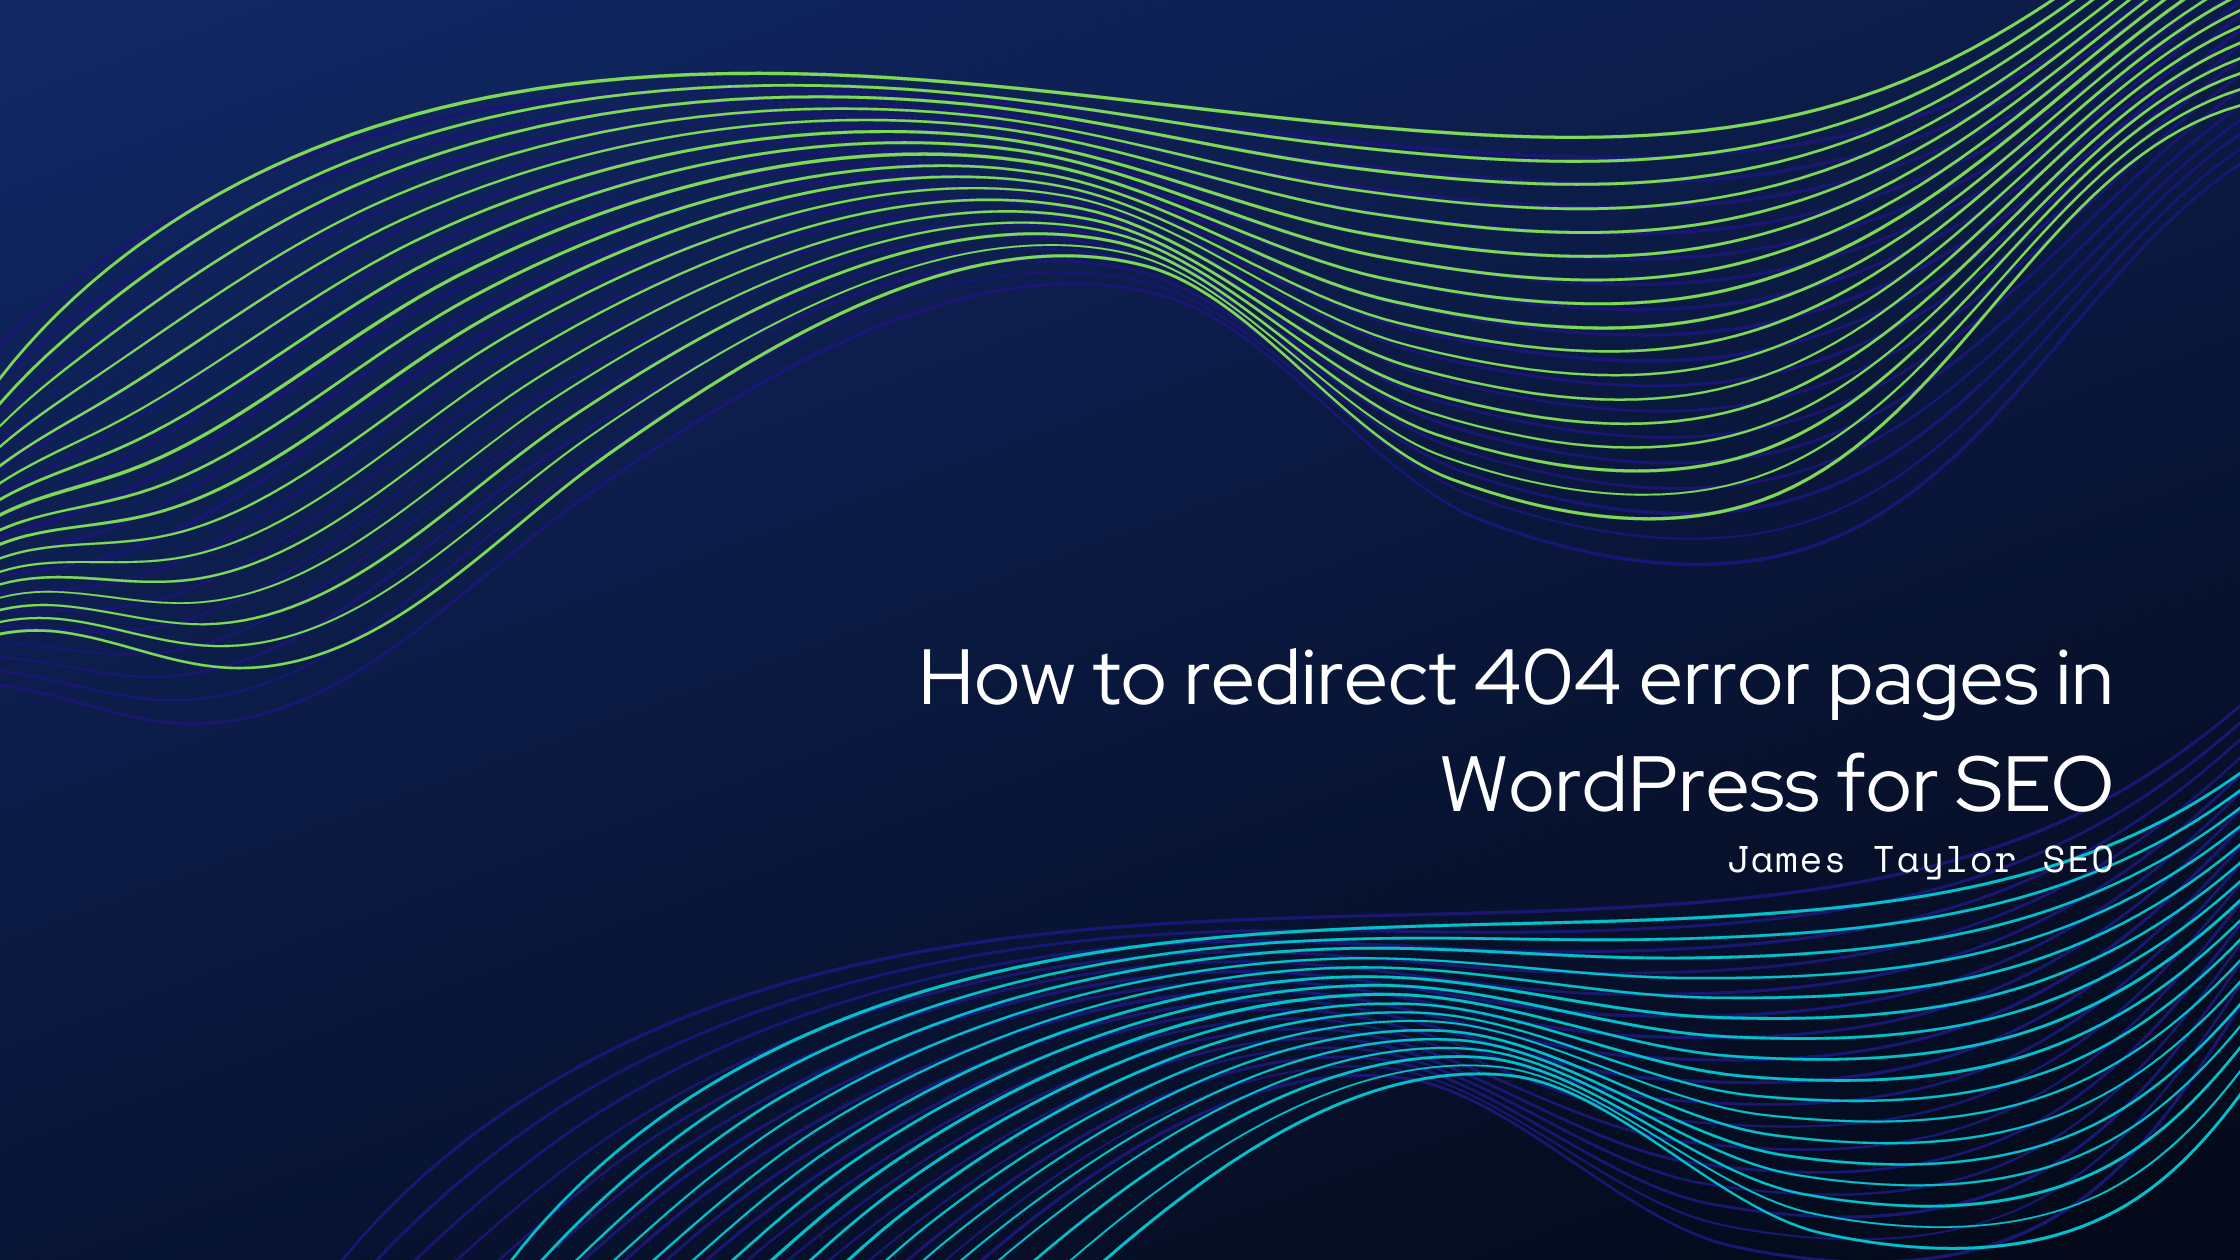 How to redirect 404 error pages in WordPress for SEO